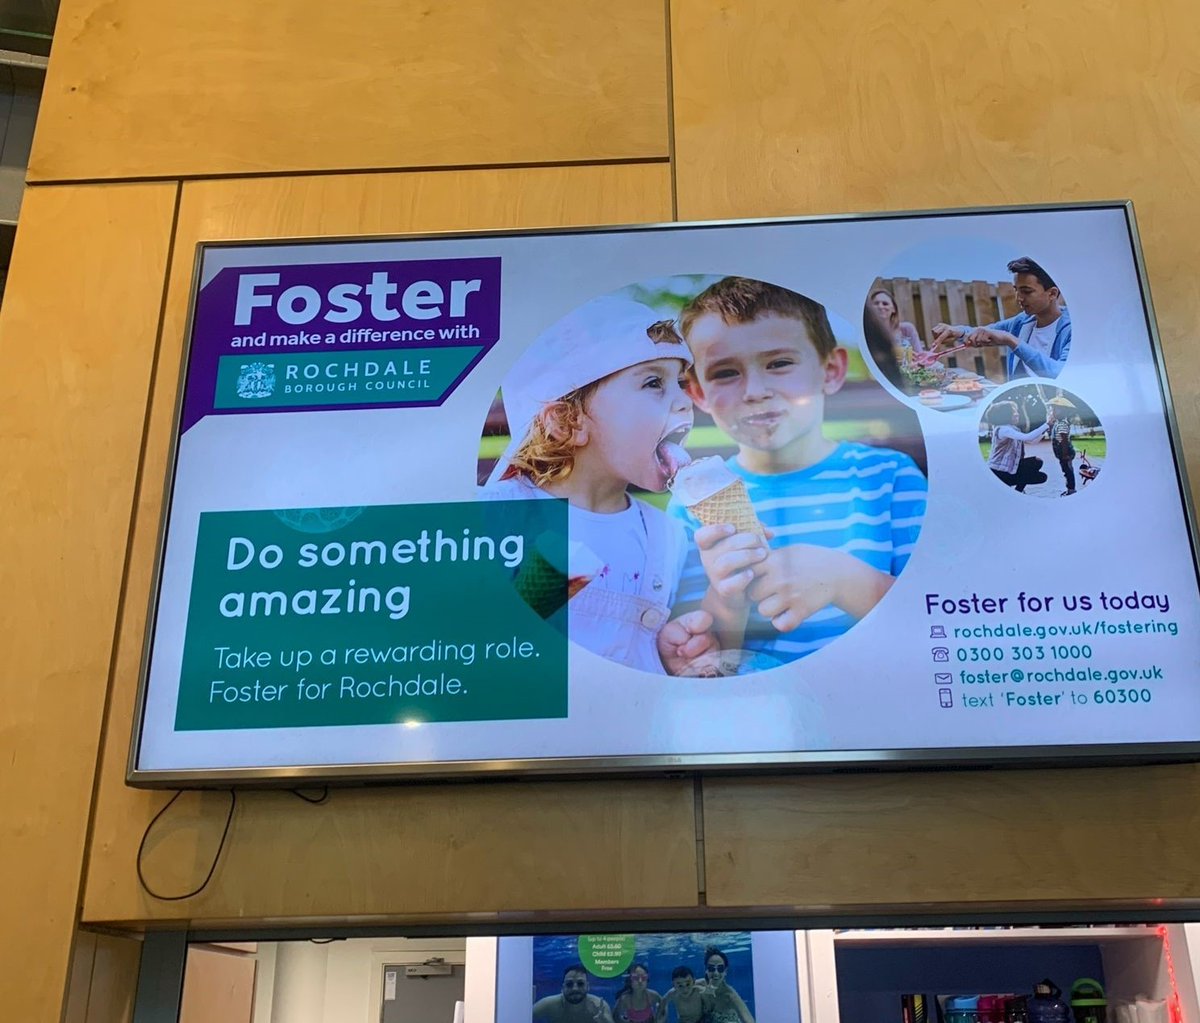 📣 Have you seen our advert in your local leisure centre? 

Keep an eye out 👀 and let us know.

Considering fostering? We'd love to hear from you. ✔️

▶️Rochdale.gov.uk/fostering
▶️Email us foster@rochdale.gov.uk
▶️Call us 0300 303 1000
▶️Text ‘FOSTER’ to 60300

#fosteratrochdale